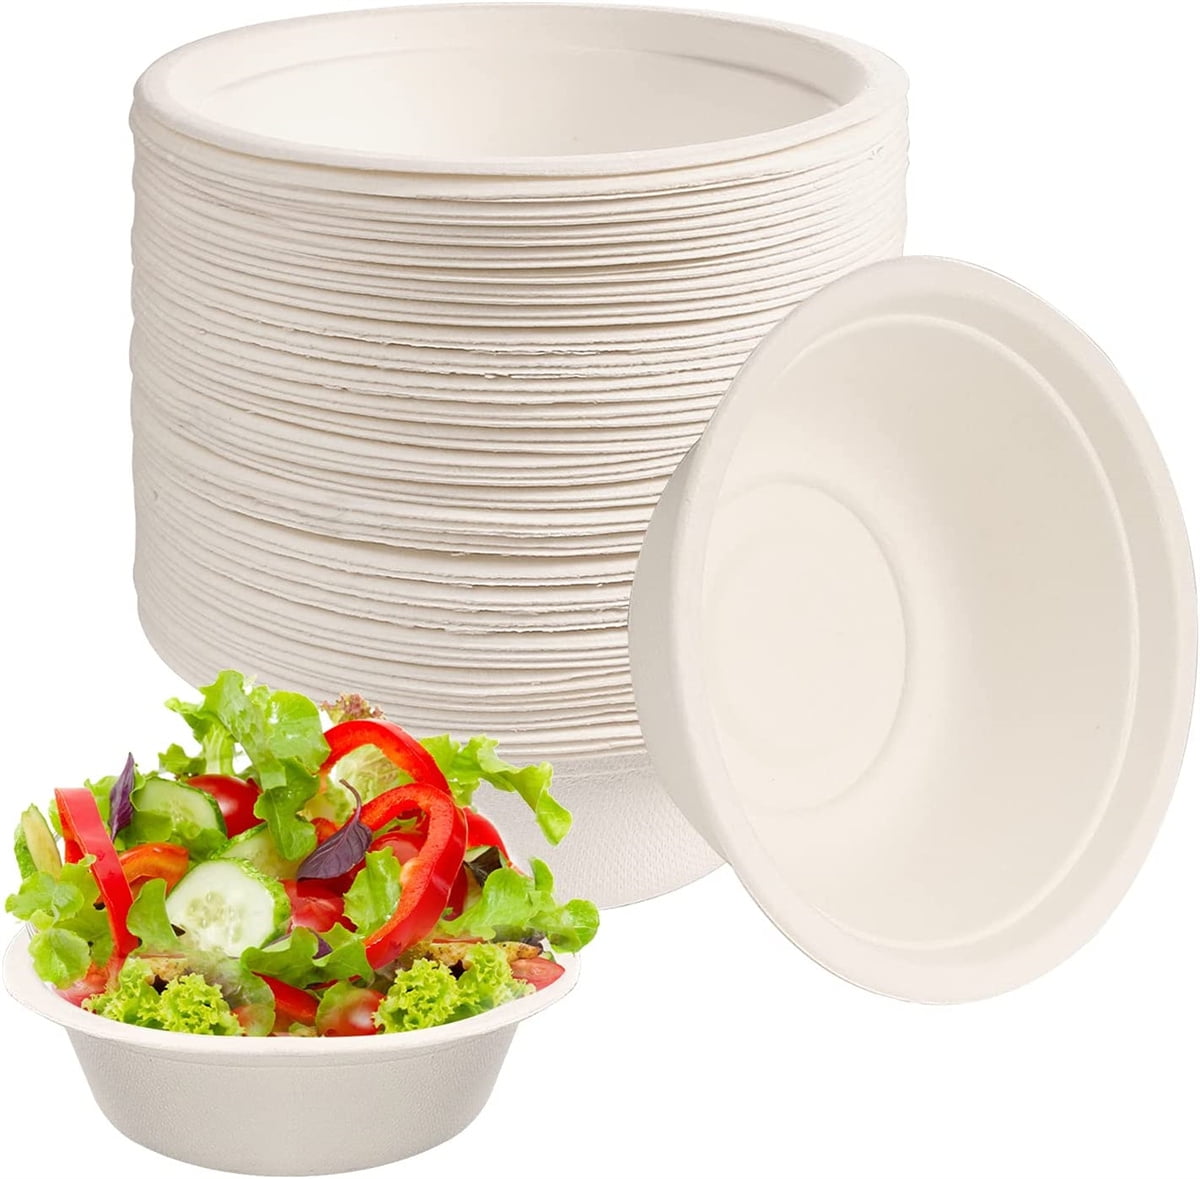  Canaan 50-Pack Large Disposable Bowls with Lids Large Paper  Bowls with Lids Salad Bowls Disposable Food Containers Hot Or Cold Dish To  Go Packaging Great For Take Outs (100, 50oz) 